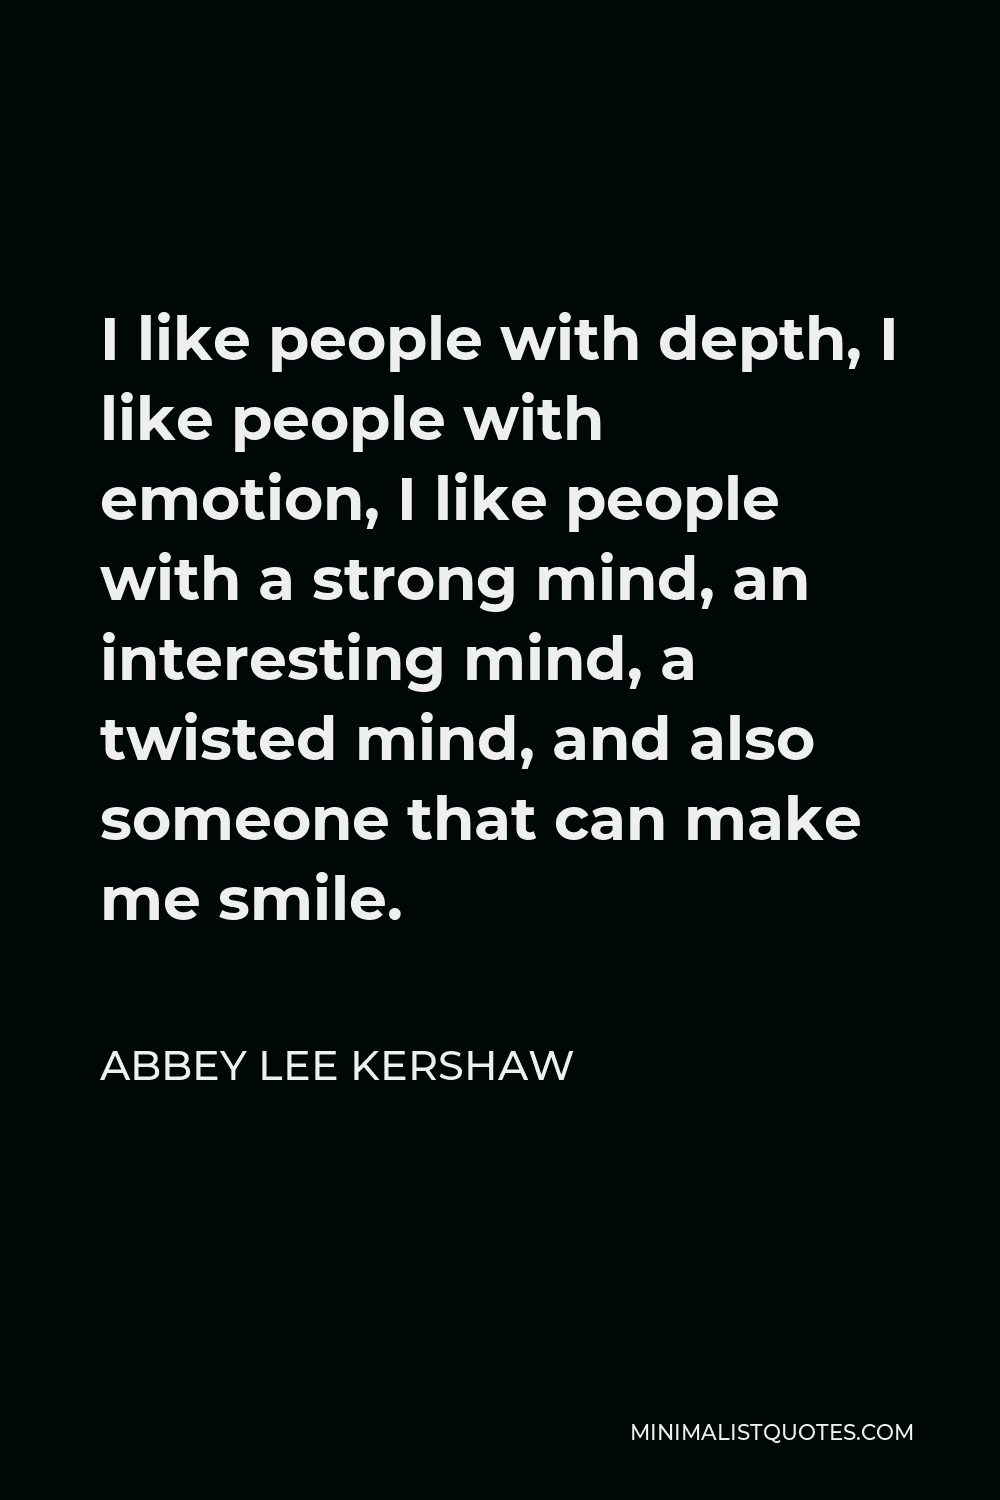 Abbey Lee Kershaw Quote - I like people with depth, I like people with emotion, I like people with a strong mind, an interesting mind, a twisted mind, and also someone that can make me smile.